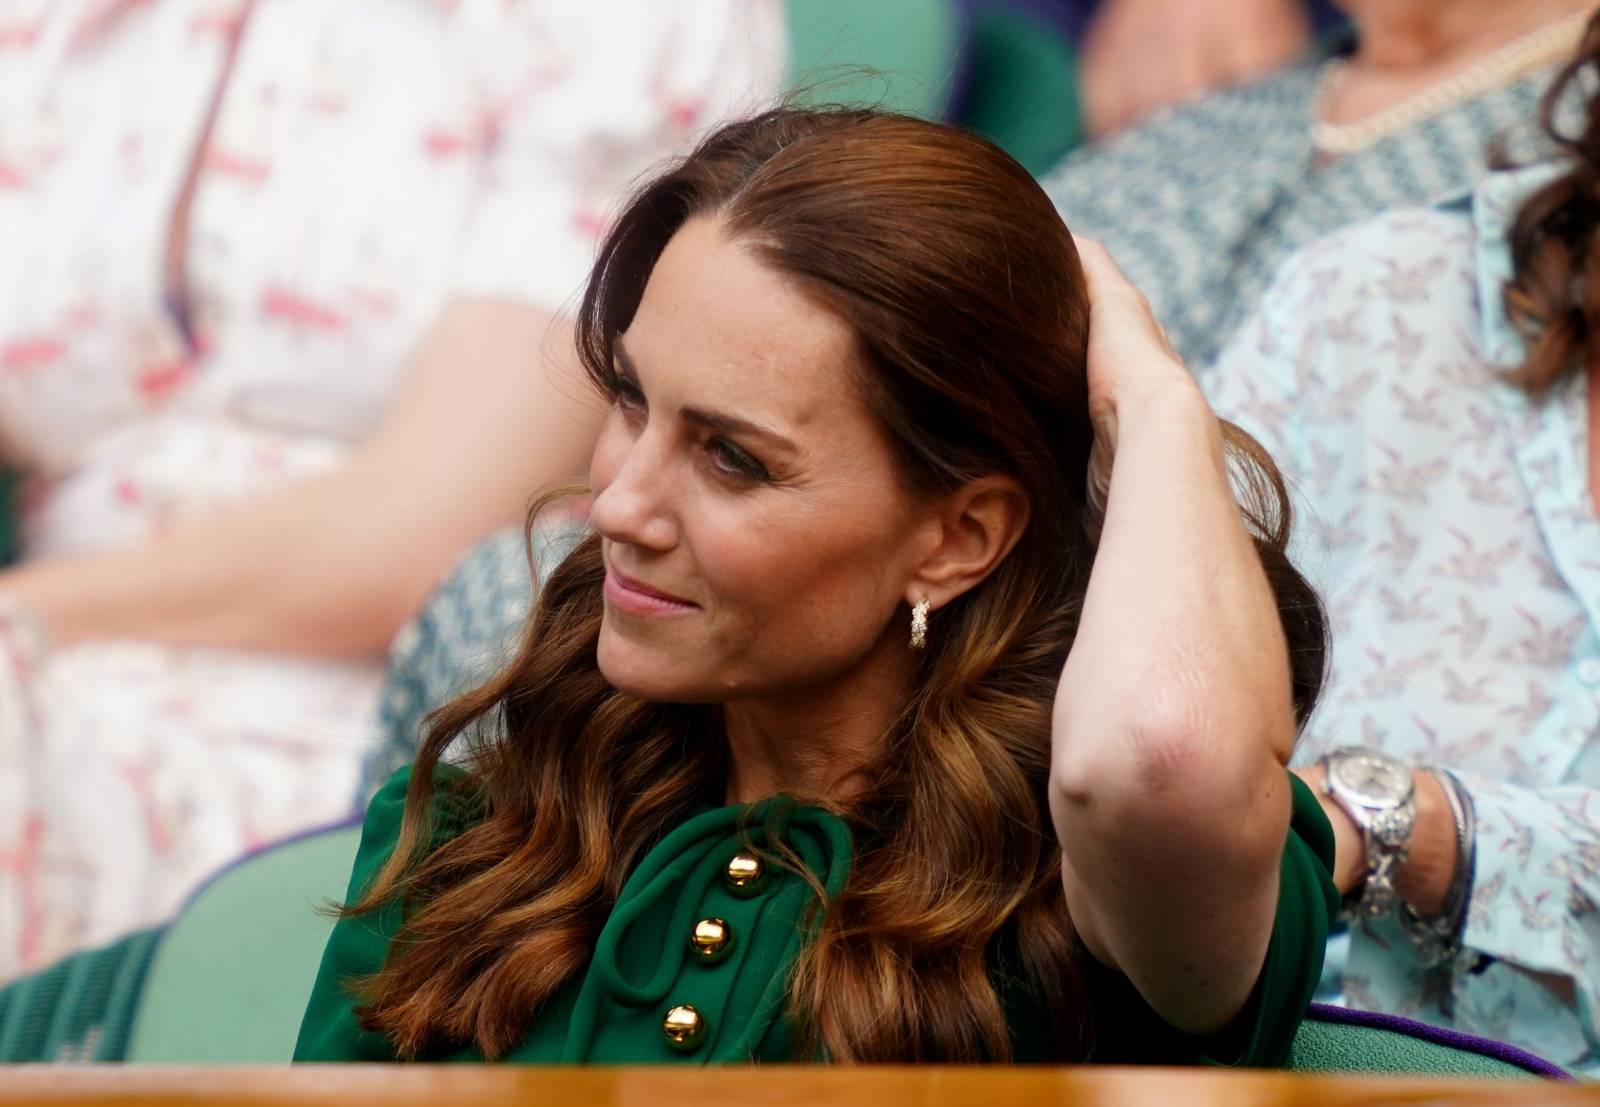 Wimbledon 2019 - Day Twelve - The All England Lawn Tennis and Croquet Club